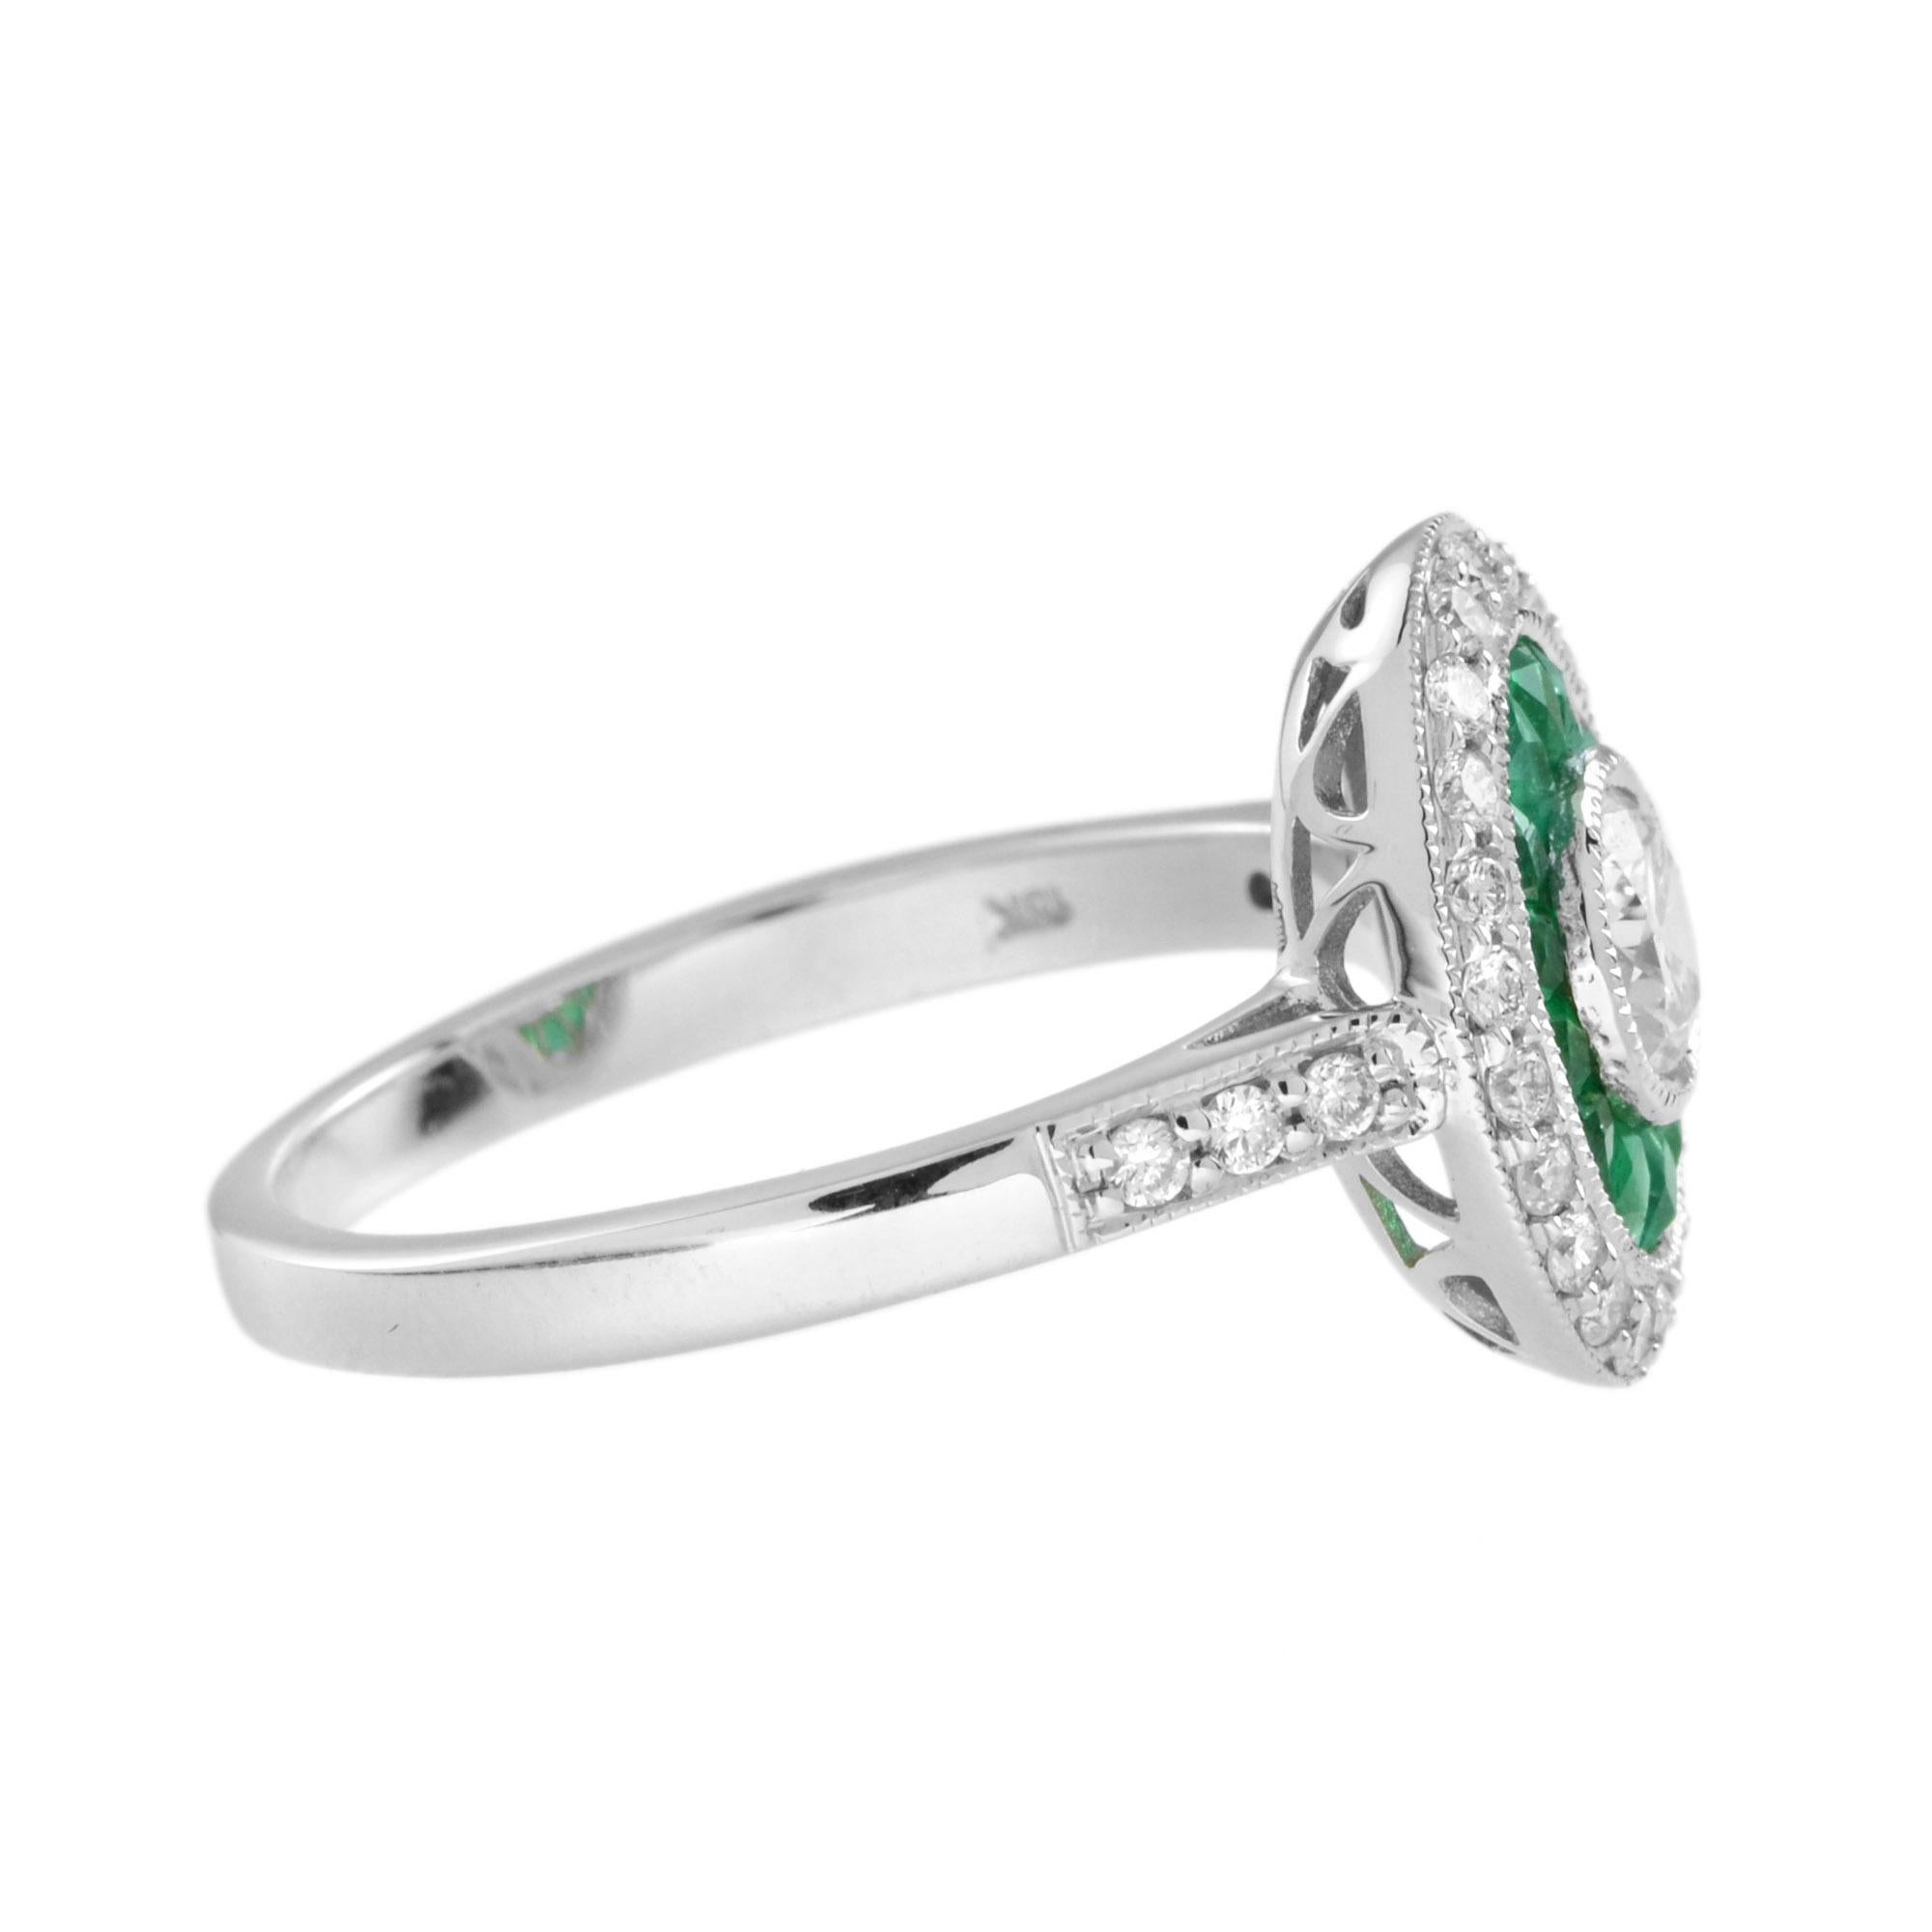 Women's Art Deco Style Diamond and French Cut Emerald Target Ring in 18K White Gold For Sale